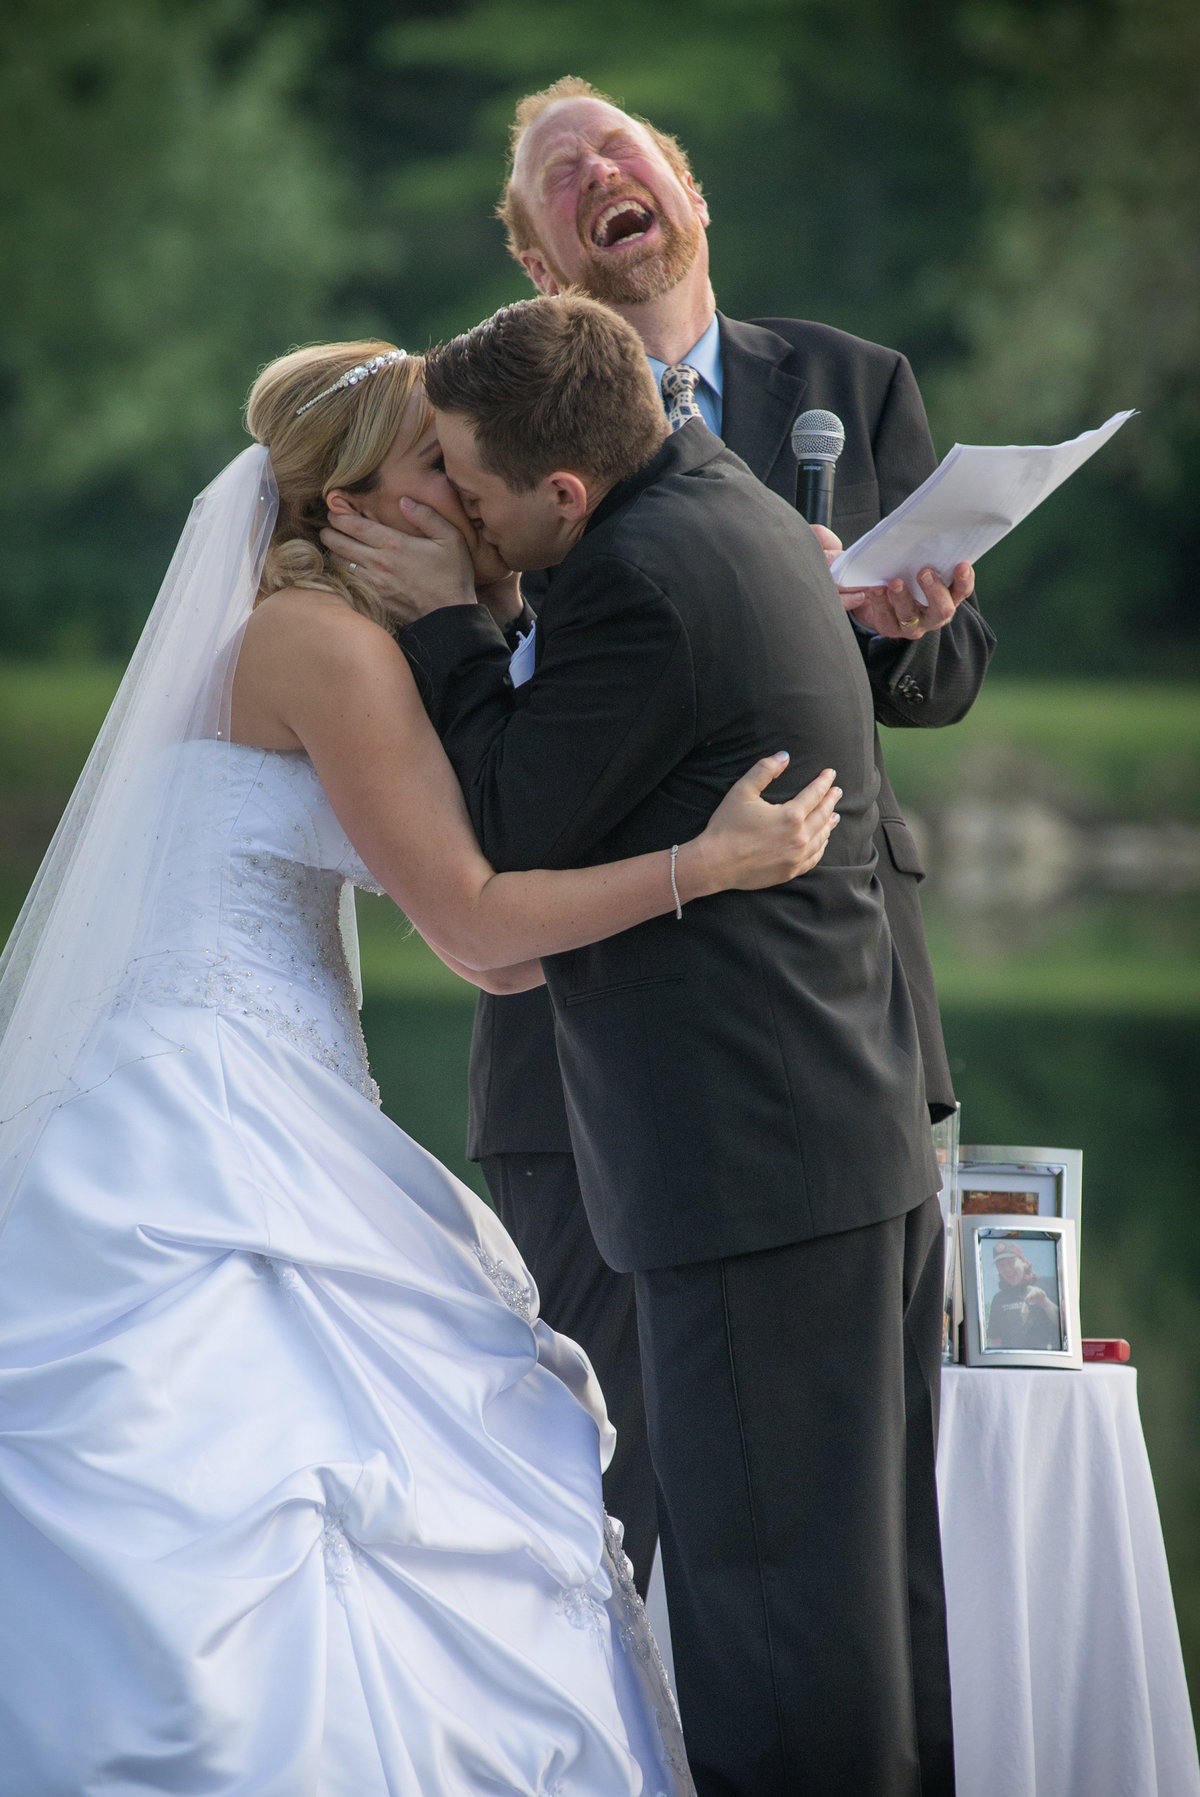 Pastor joyfully laughing during couples first kiss